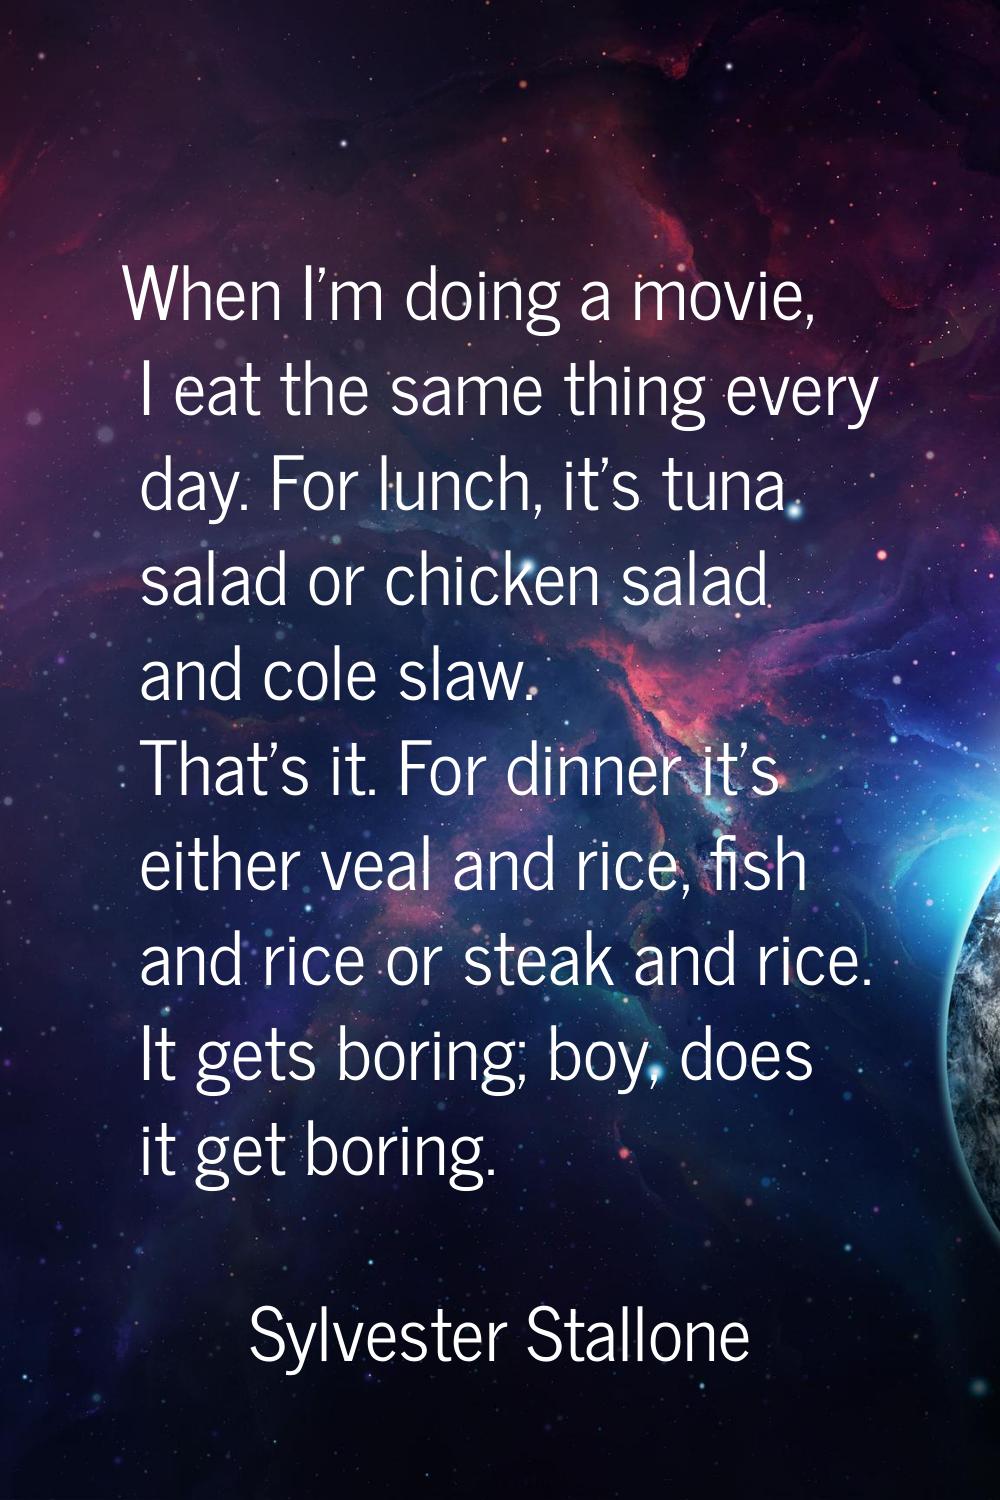 When I'm doing a movie, I eat the same thing every day. For lunch, it's tuna salad or chicken salad